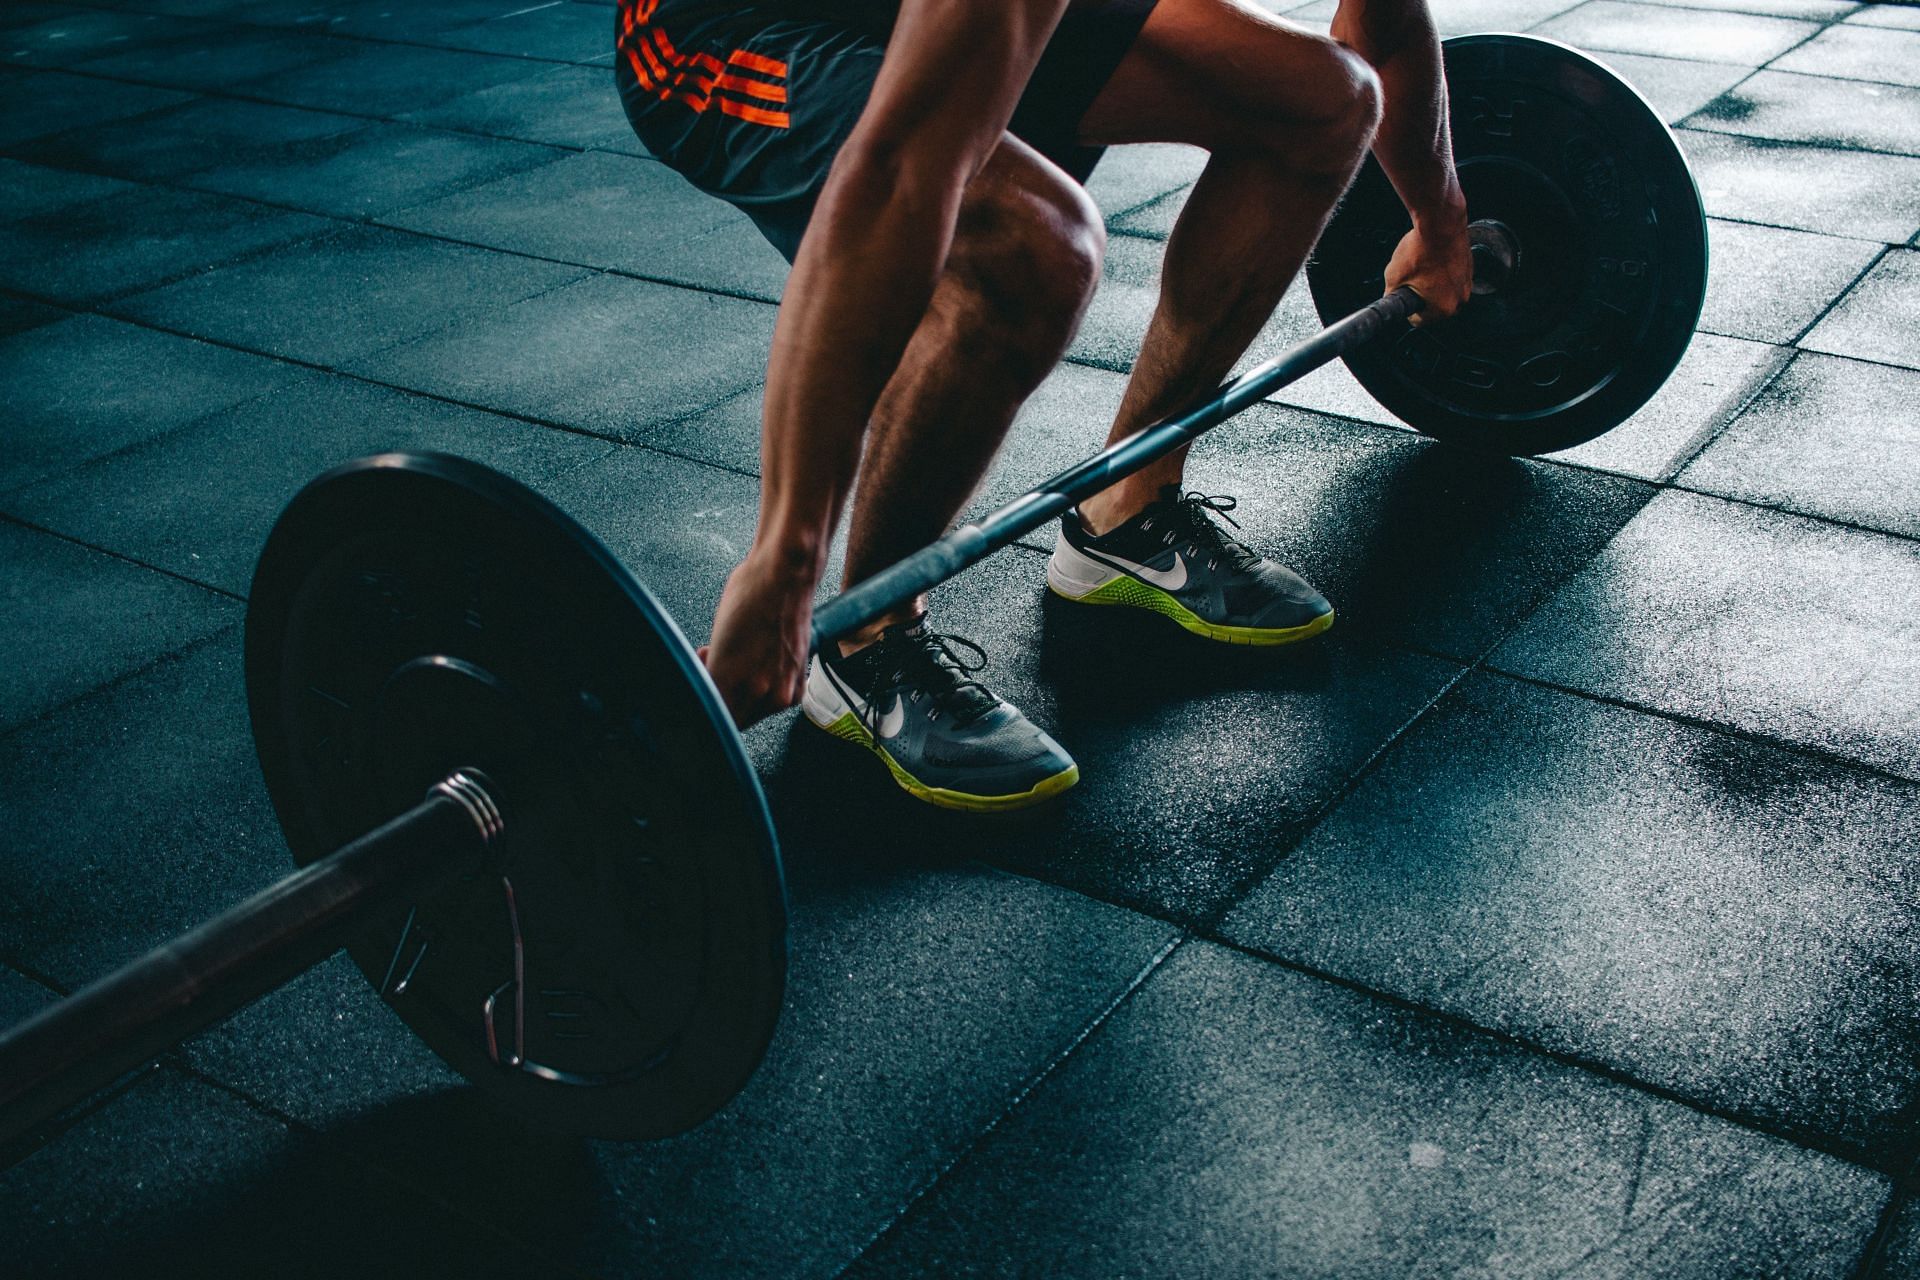 Mind-Muscle connection helps in strength training (Photo by Victor Freitas on Unsplash)